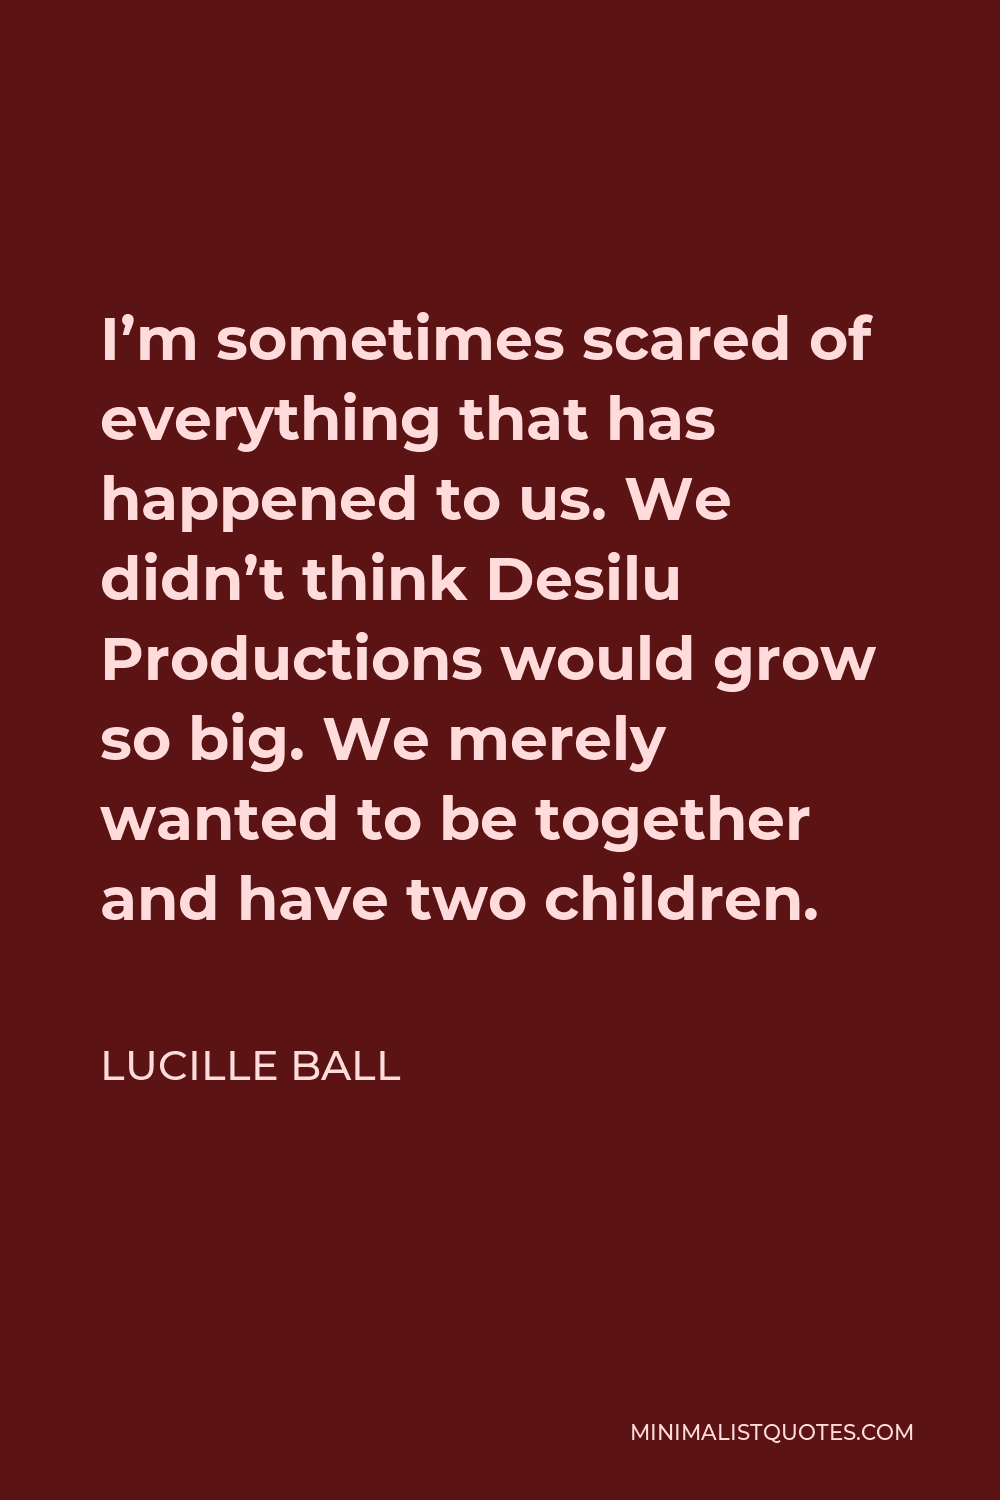 Lucille Ball Quote - I’m sometimes scared of everything that has happened to us. We didn’t think Desilu Productions would grow so big. We merely wanted to be together and have two children.